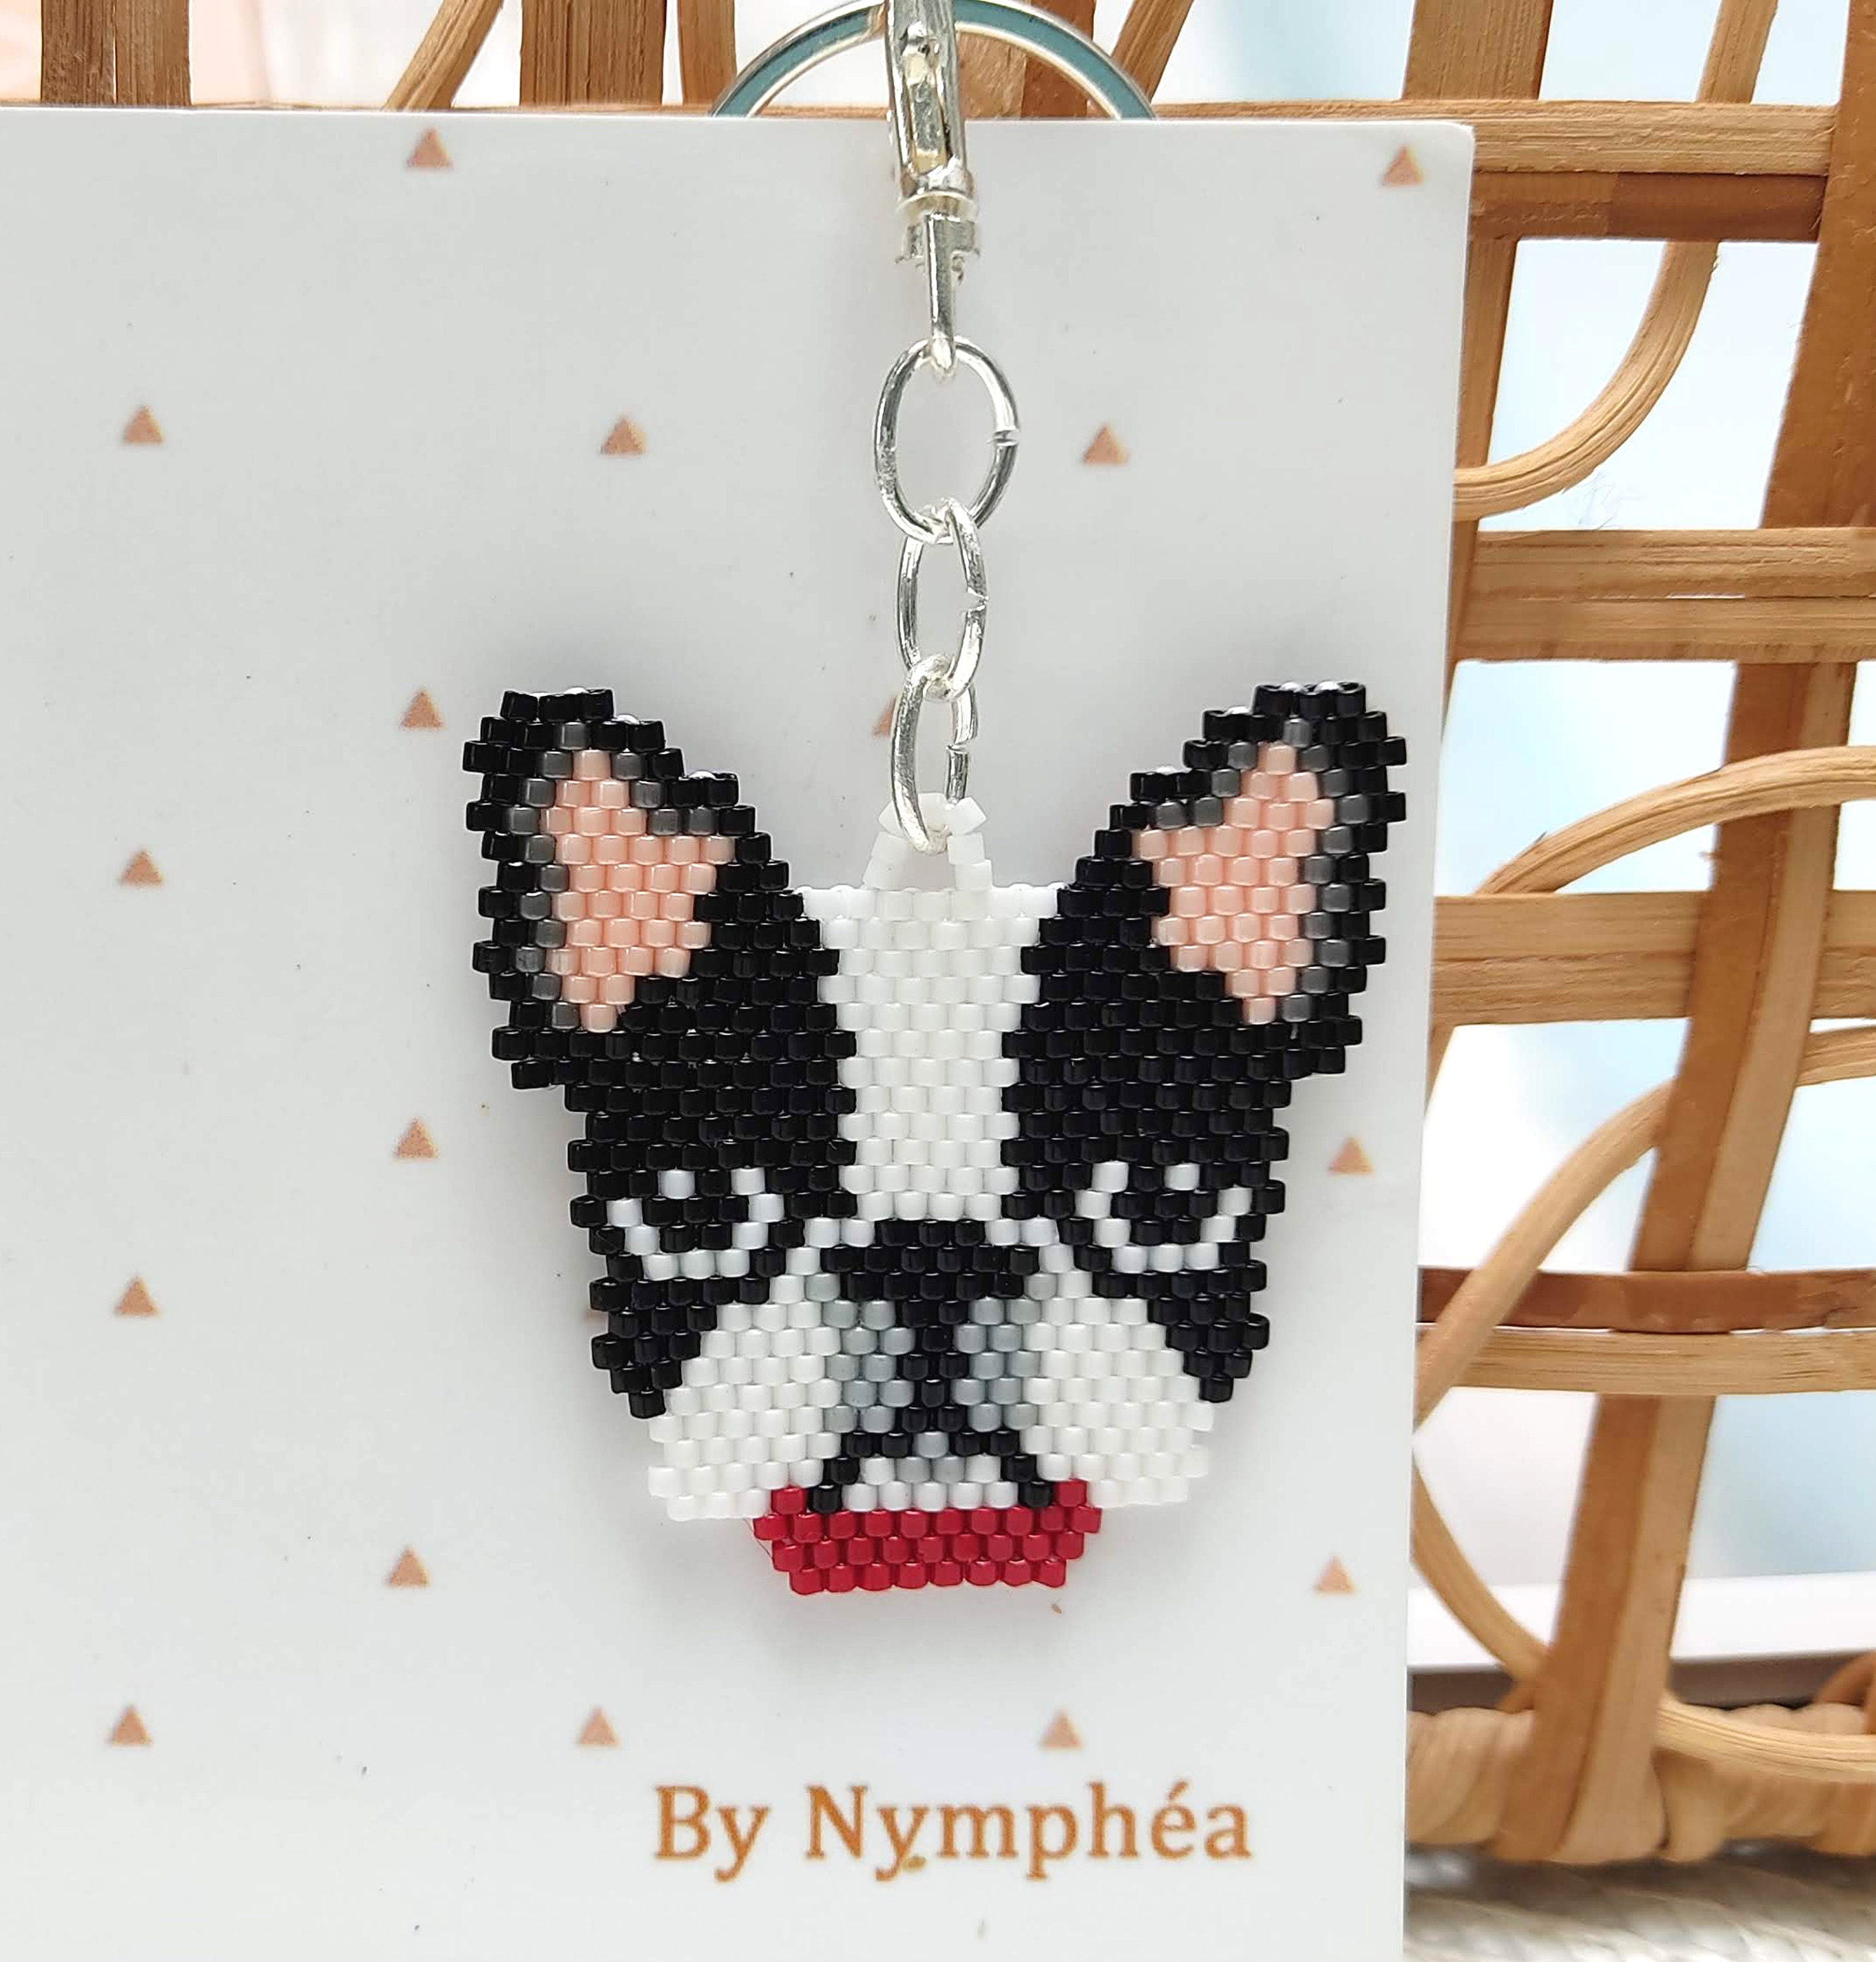 Cute Transparent French Bulldog Keychain – Dogs Me